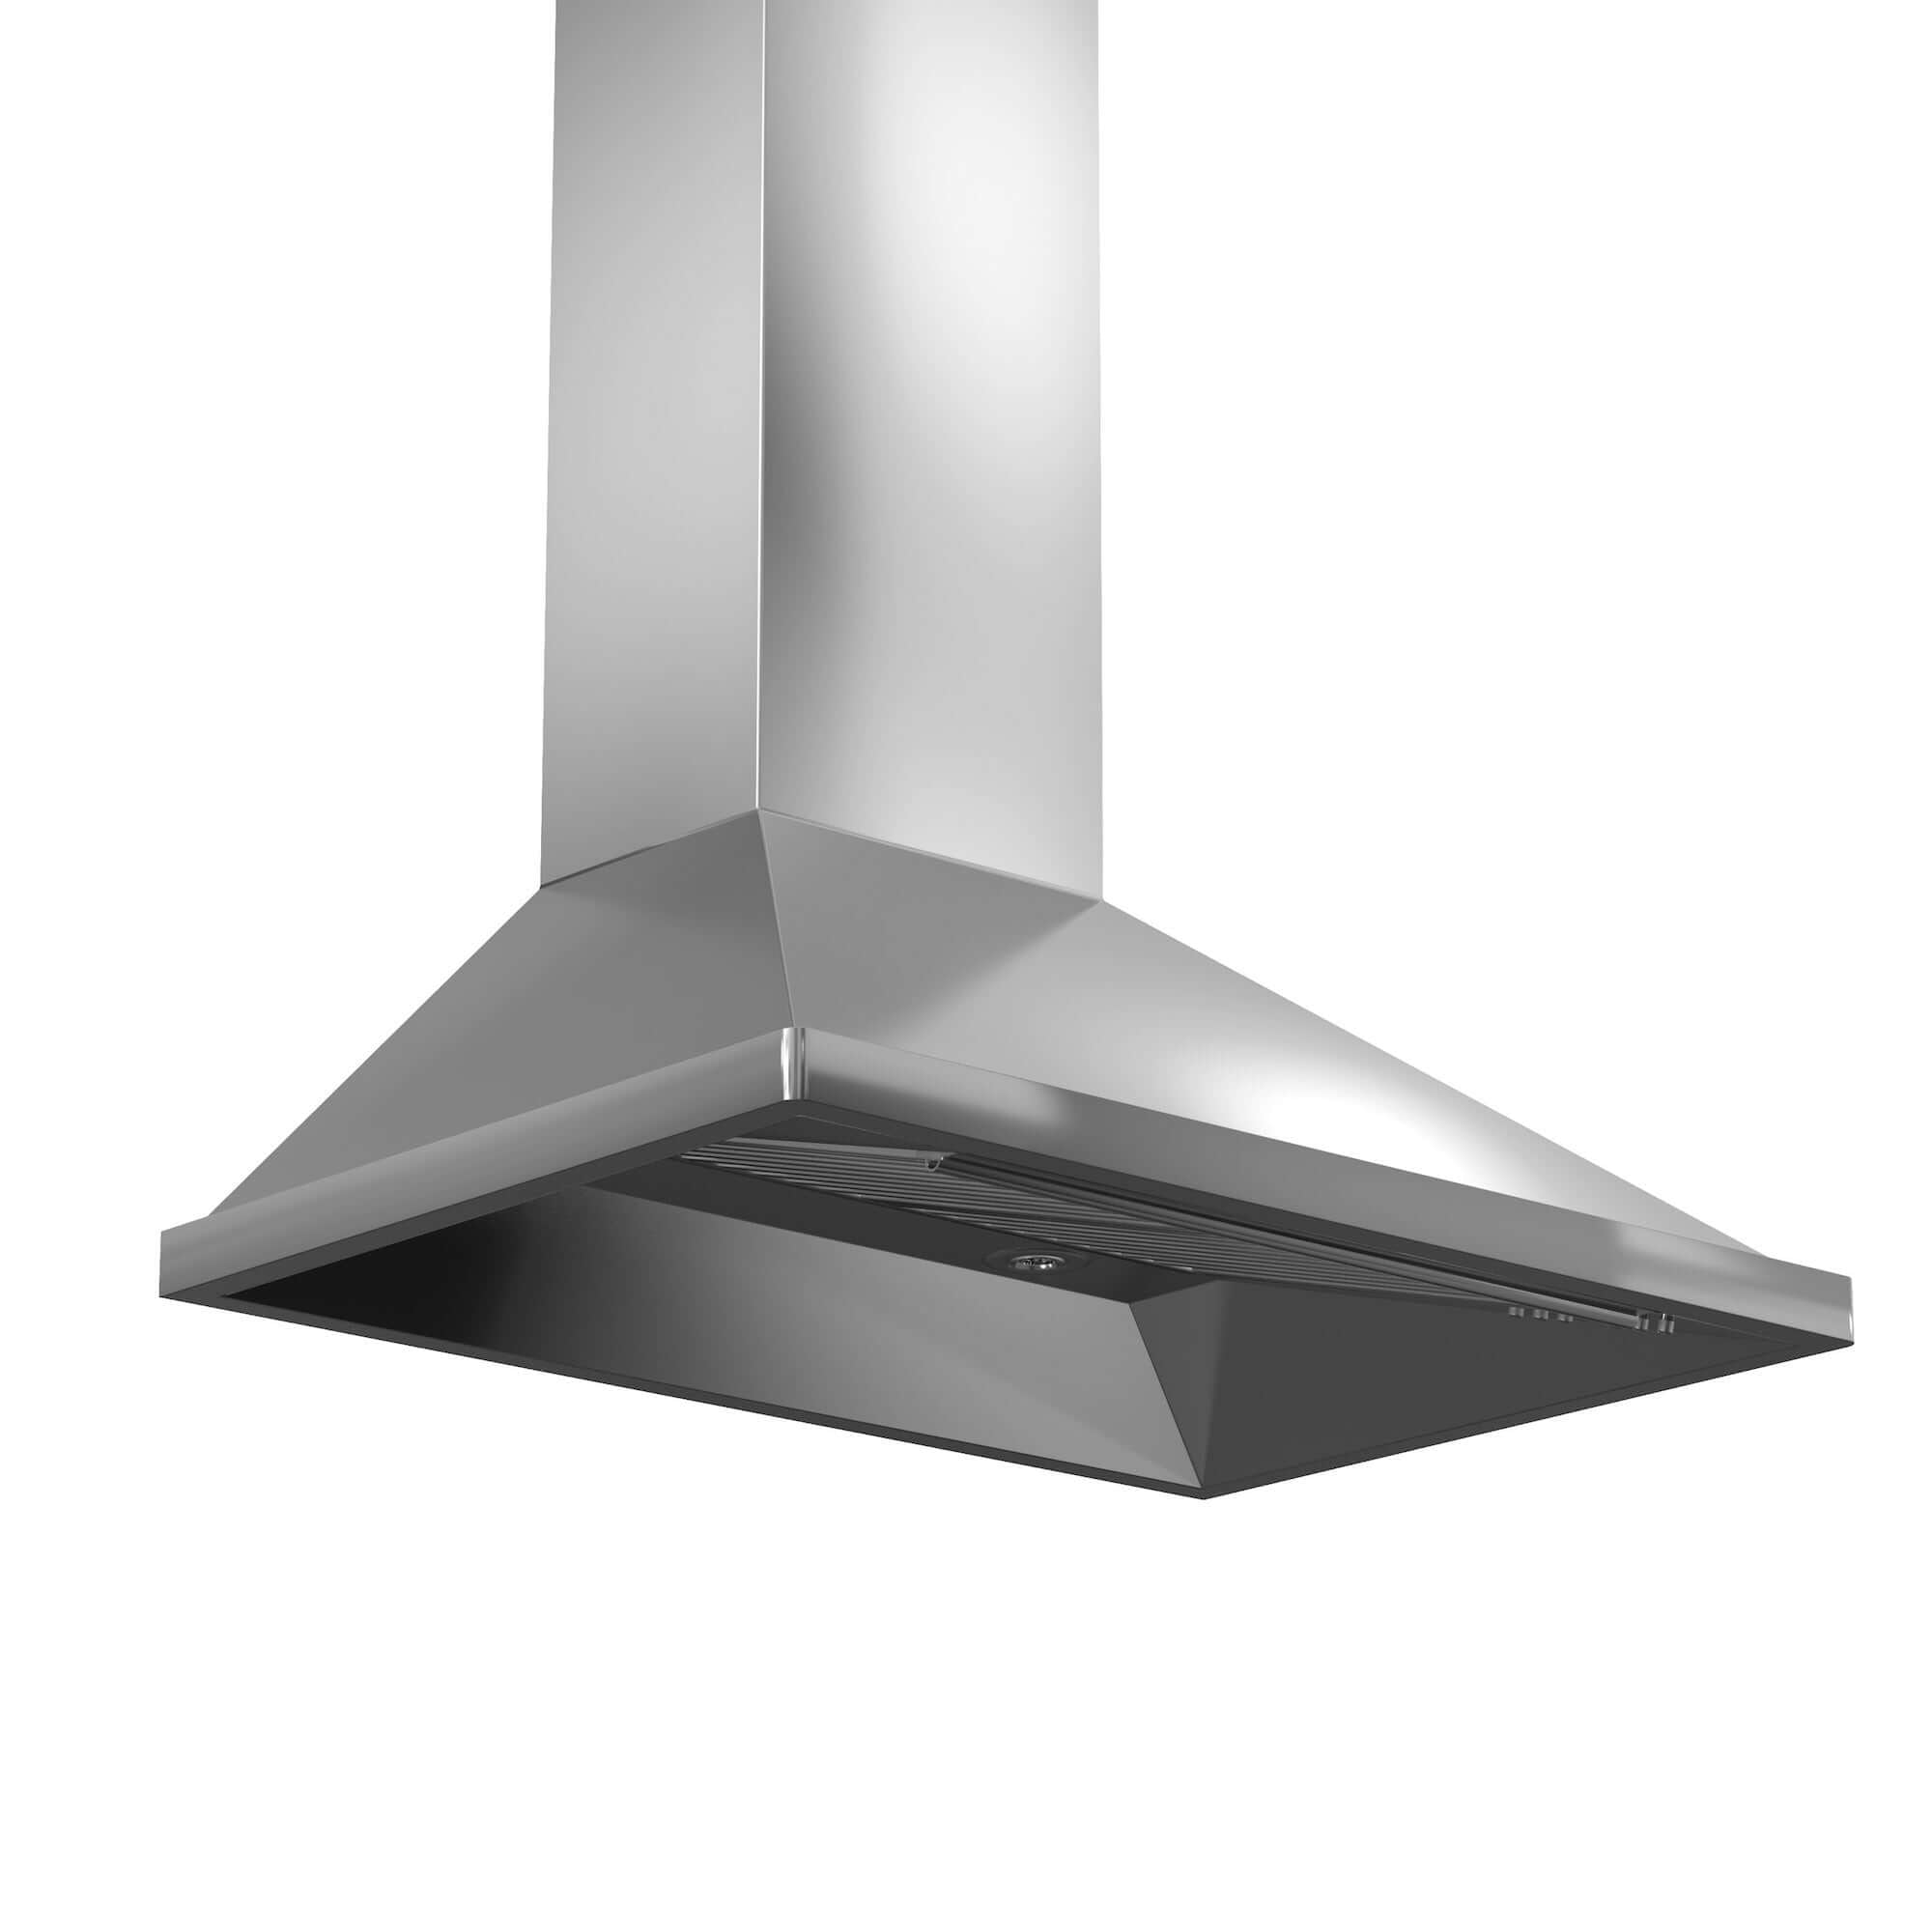 ZLINE 36 in. Convertible Vent Wall Mount Range Hood in Outdoor Approved Stainless Steel (696-304-36) side under.